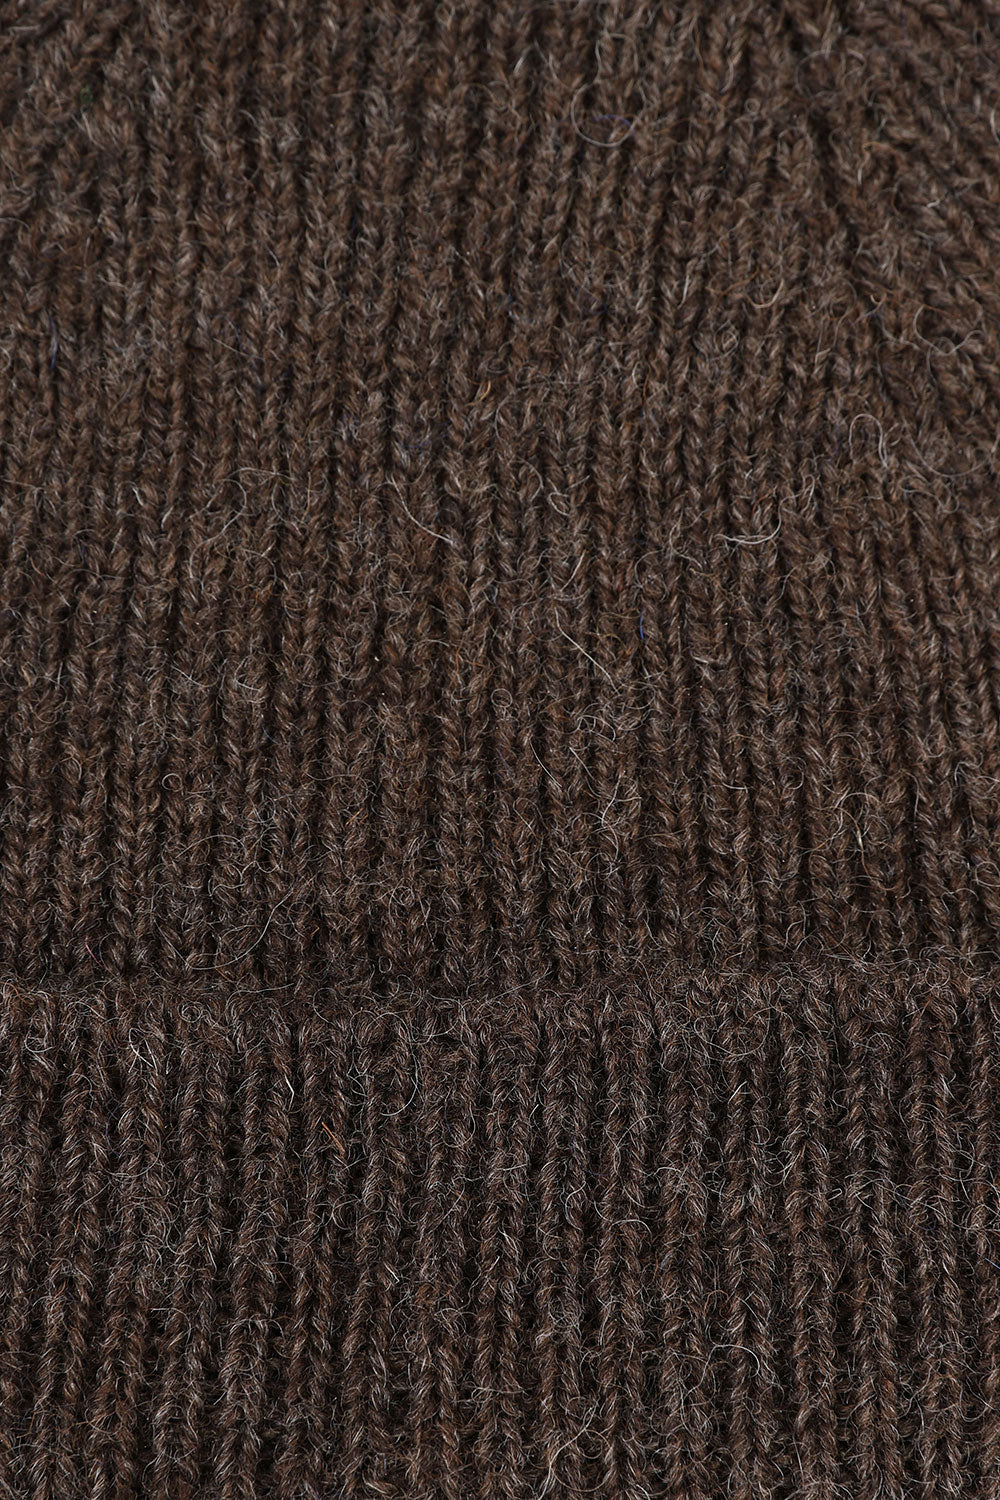 Close-up view of Uskees 4005 'bran' brownish wool hat, showing the texture of the Bluefaced Leicester and Masham wool blend.